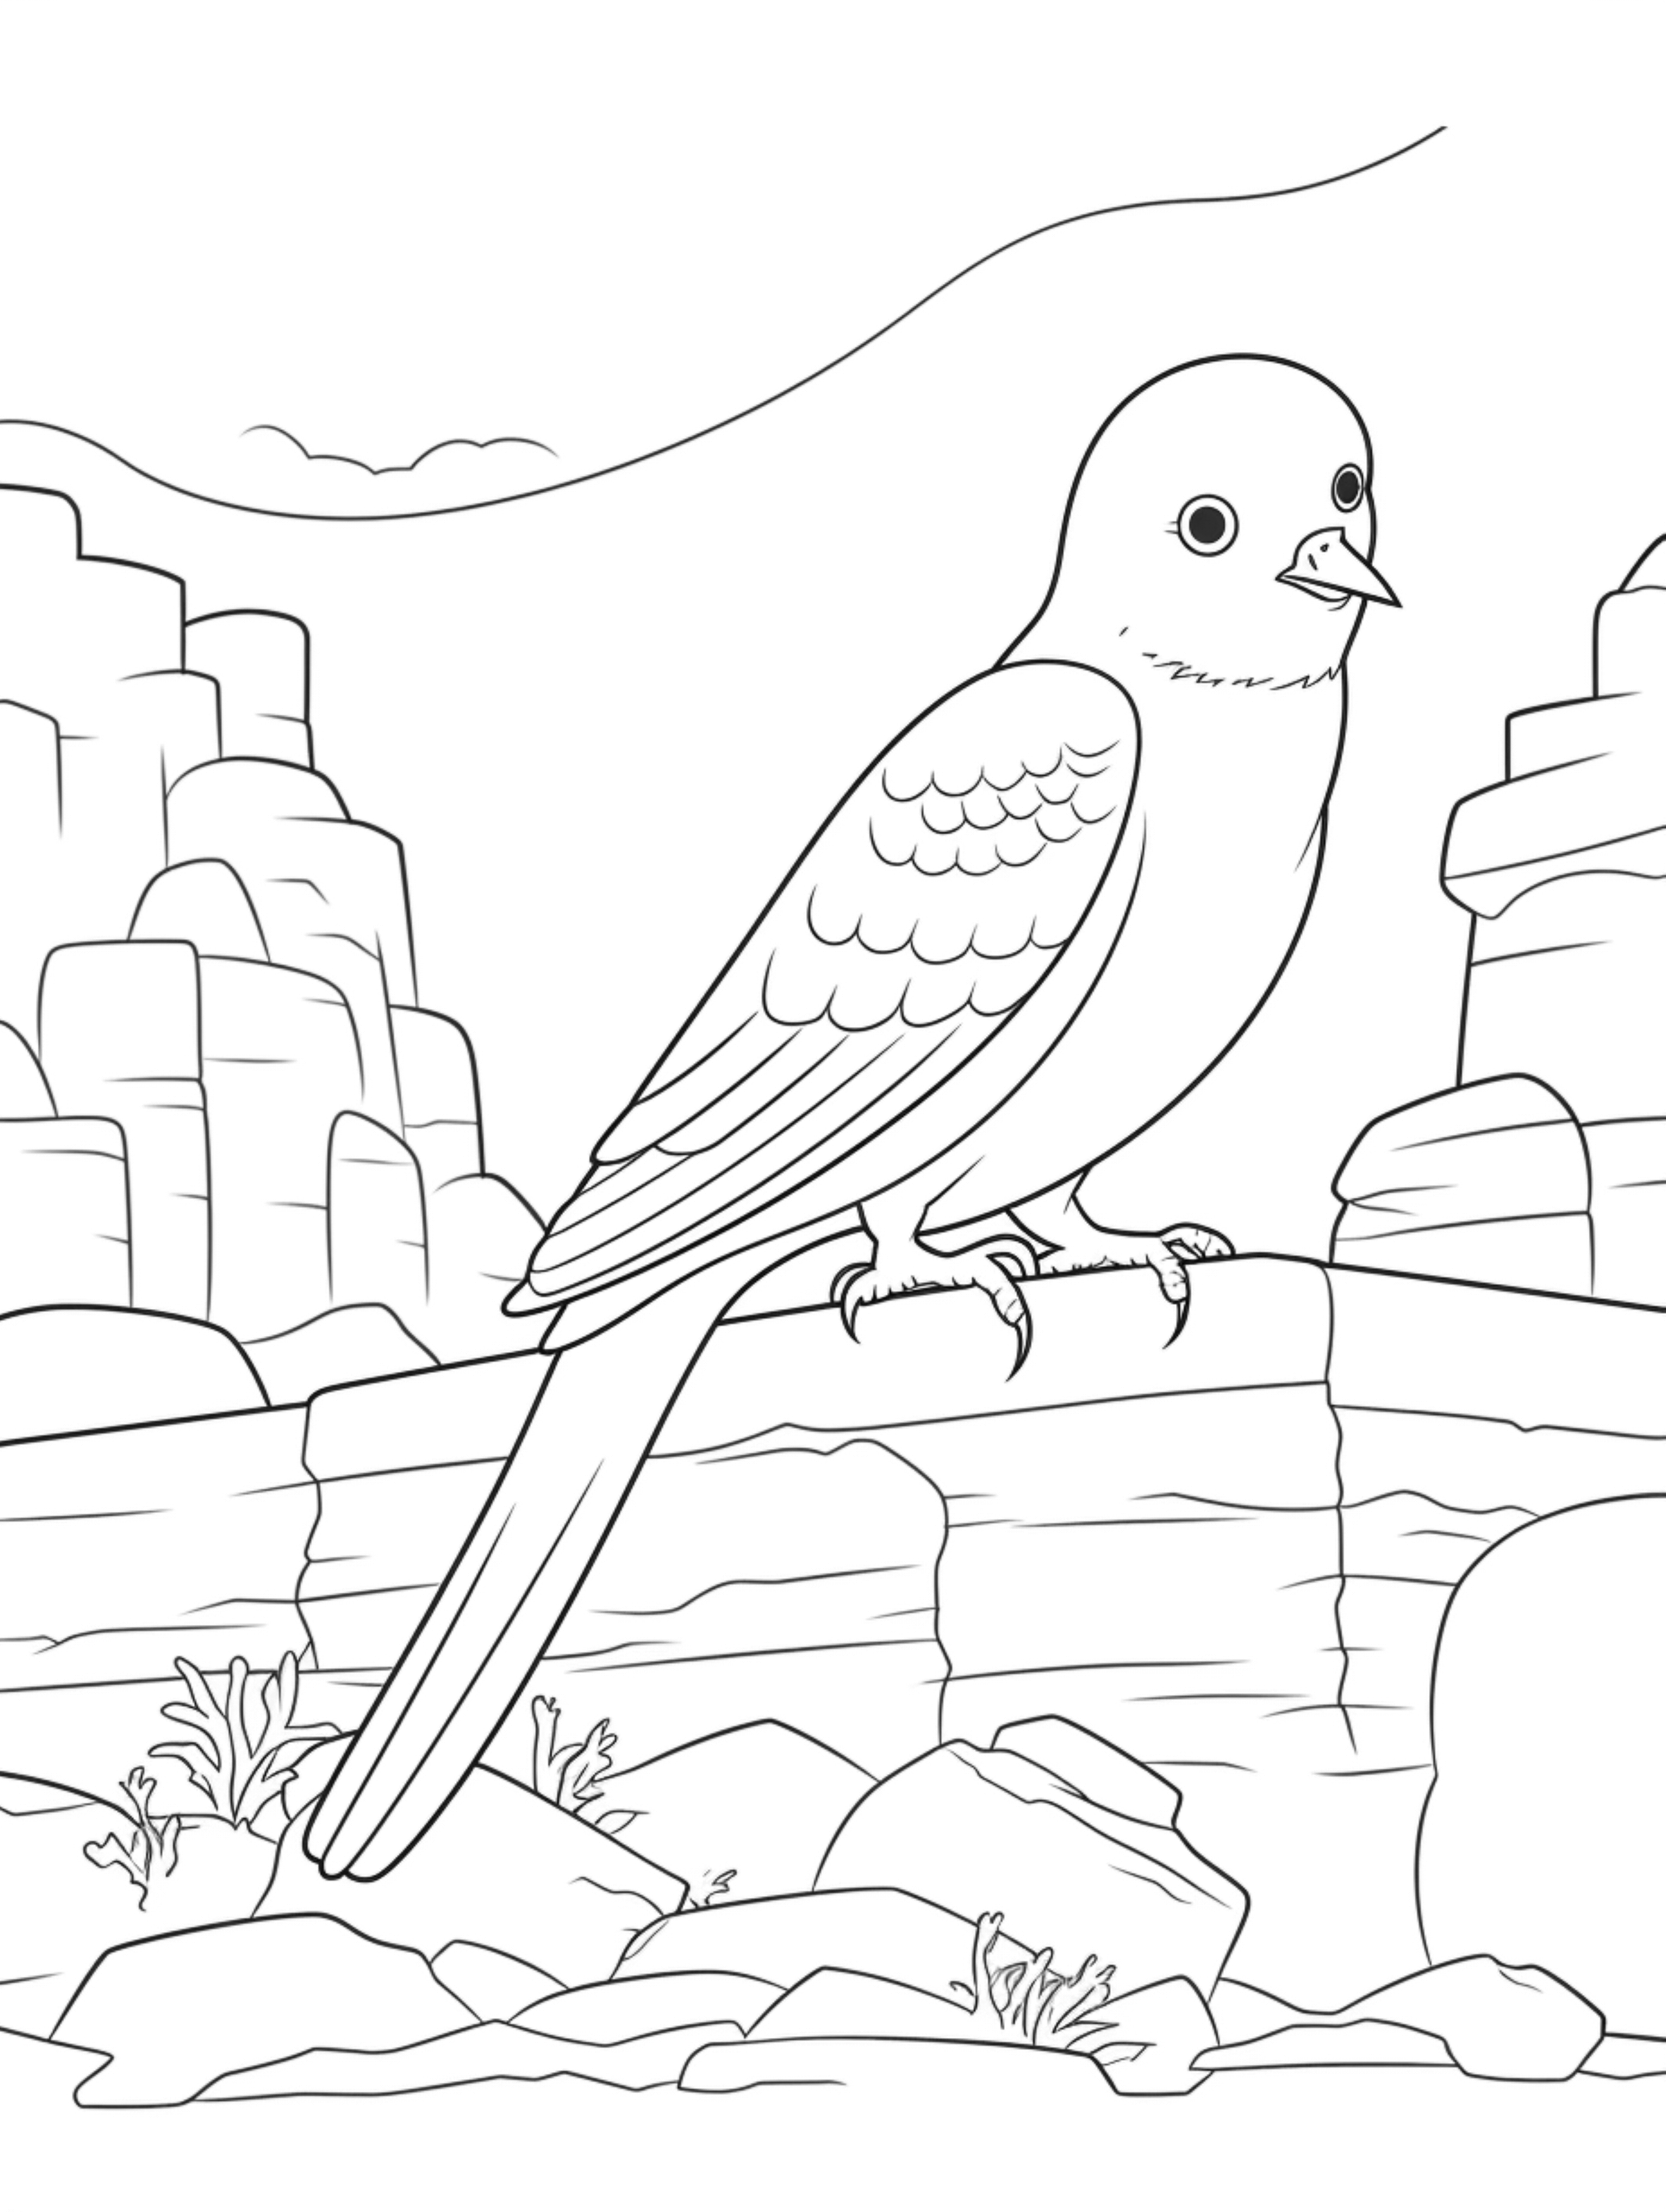 budgie coloring page